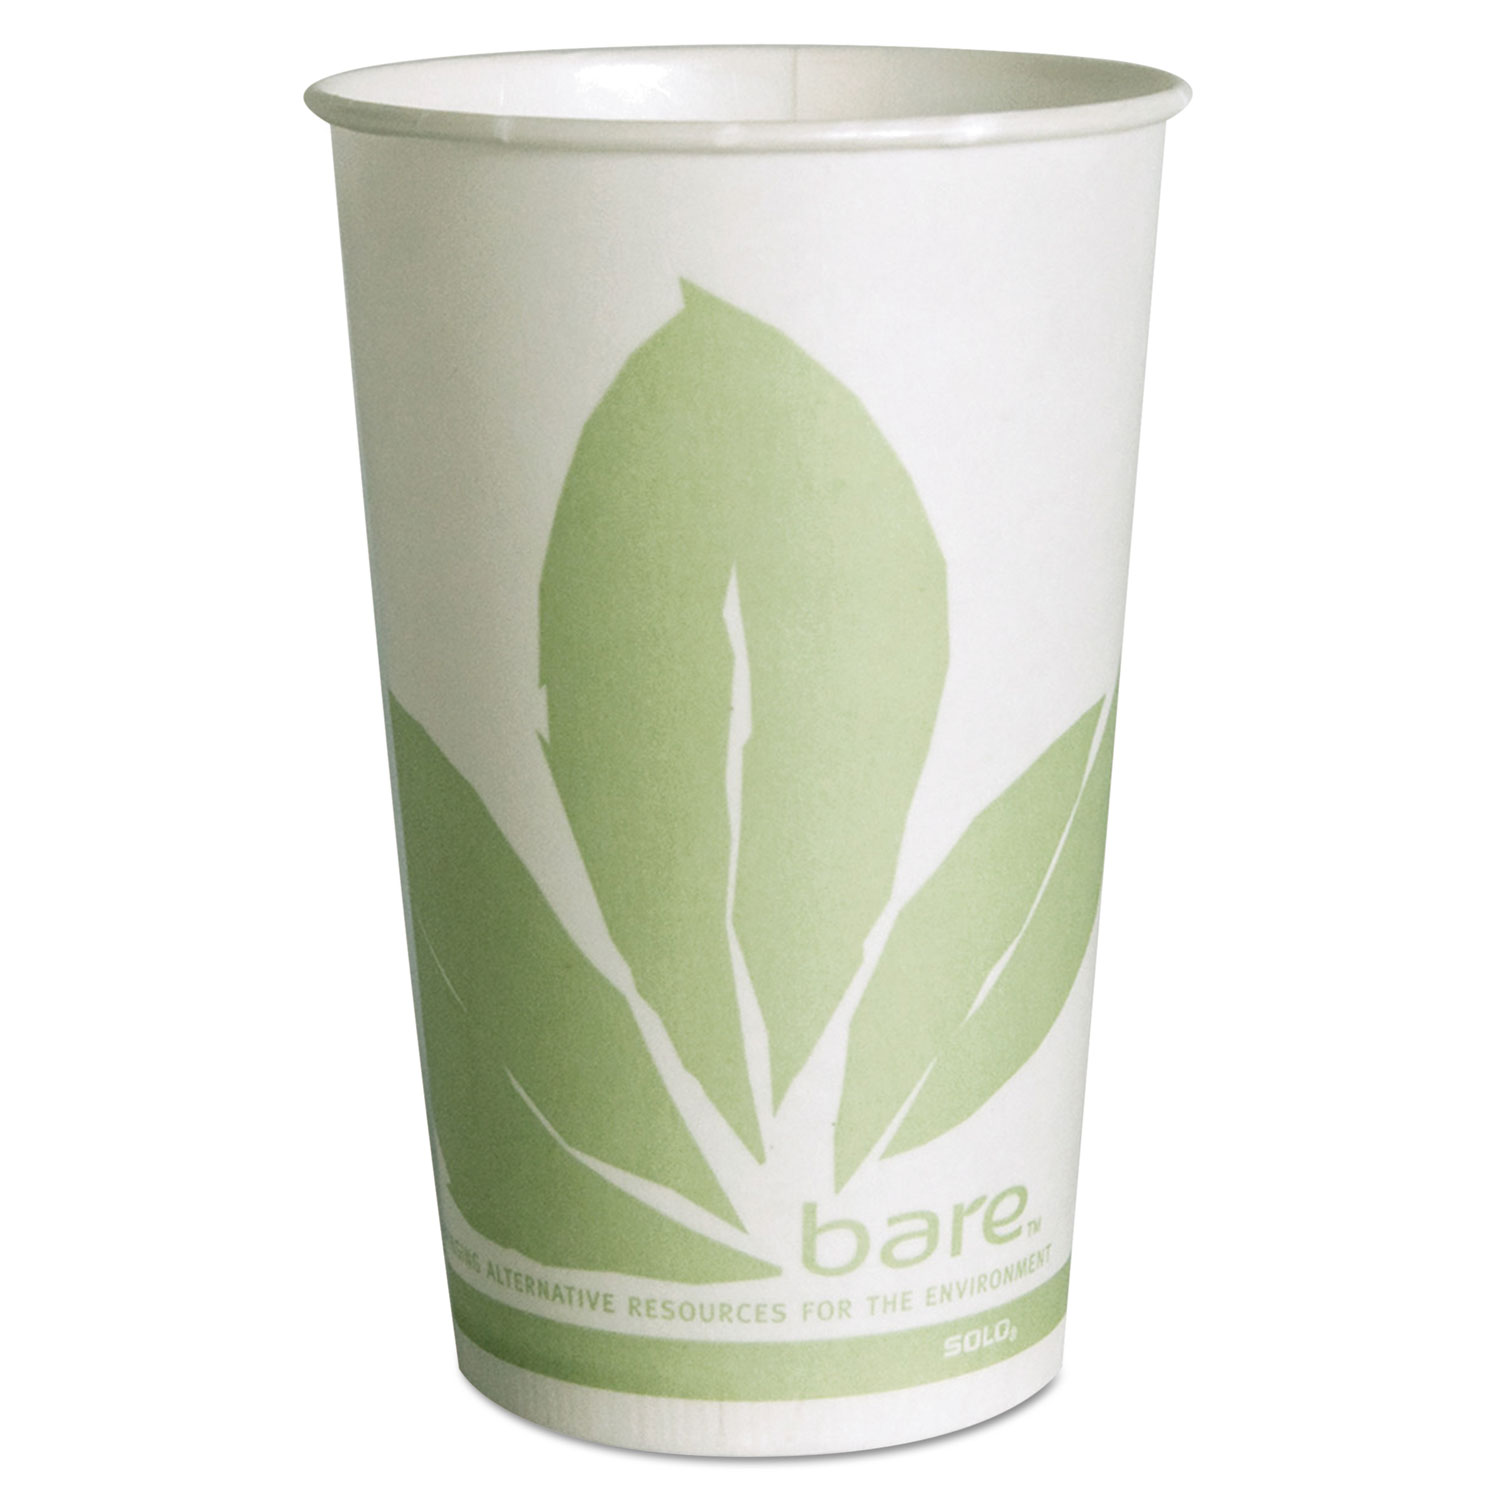 SOLO® Cup Company Bare Eco-Forward Treated Paper Cold Cups, 16 oz, Green/White, 100/Sleeve 10 Sleeves/Carton